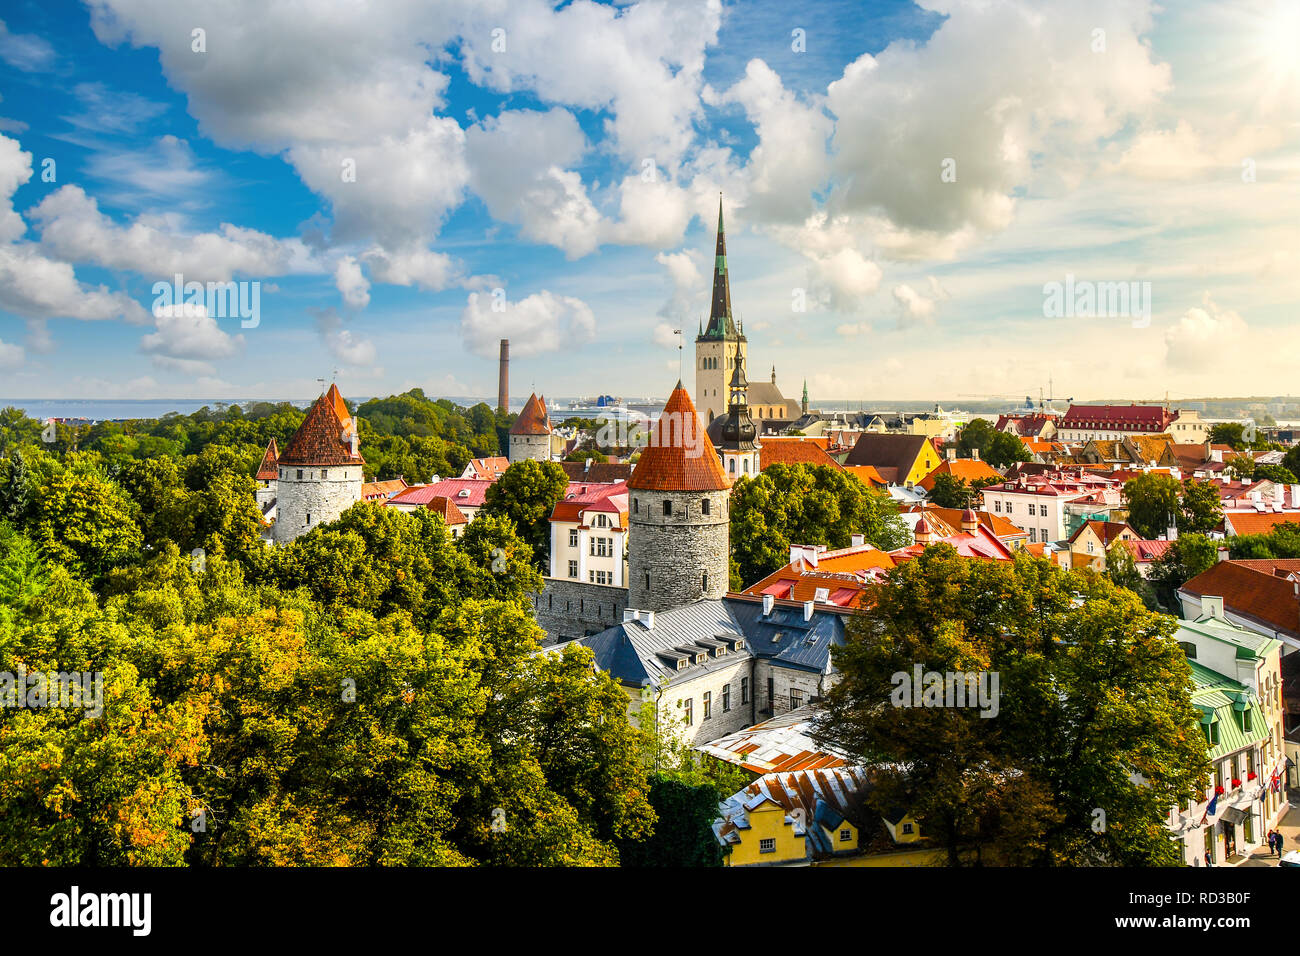 Afternoon view overlooking the medieval walled city of Tallinn Estonia on an early autumn day in the Baltics region of Northern Europe. Stock Photo